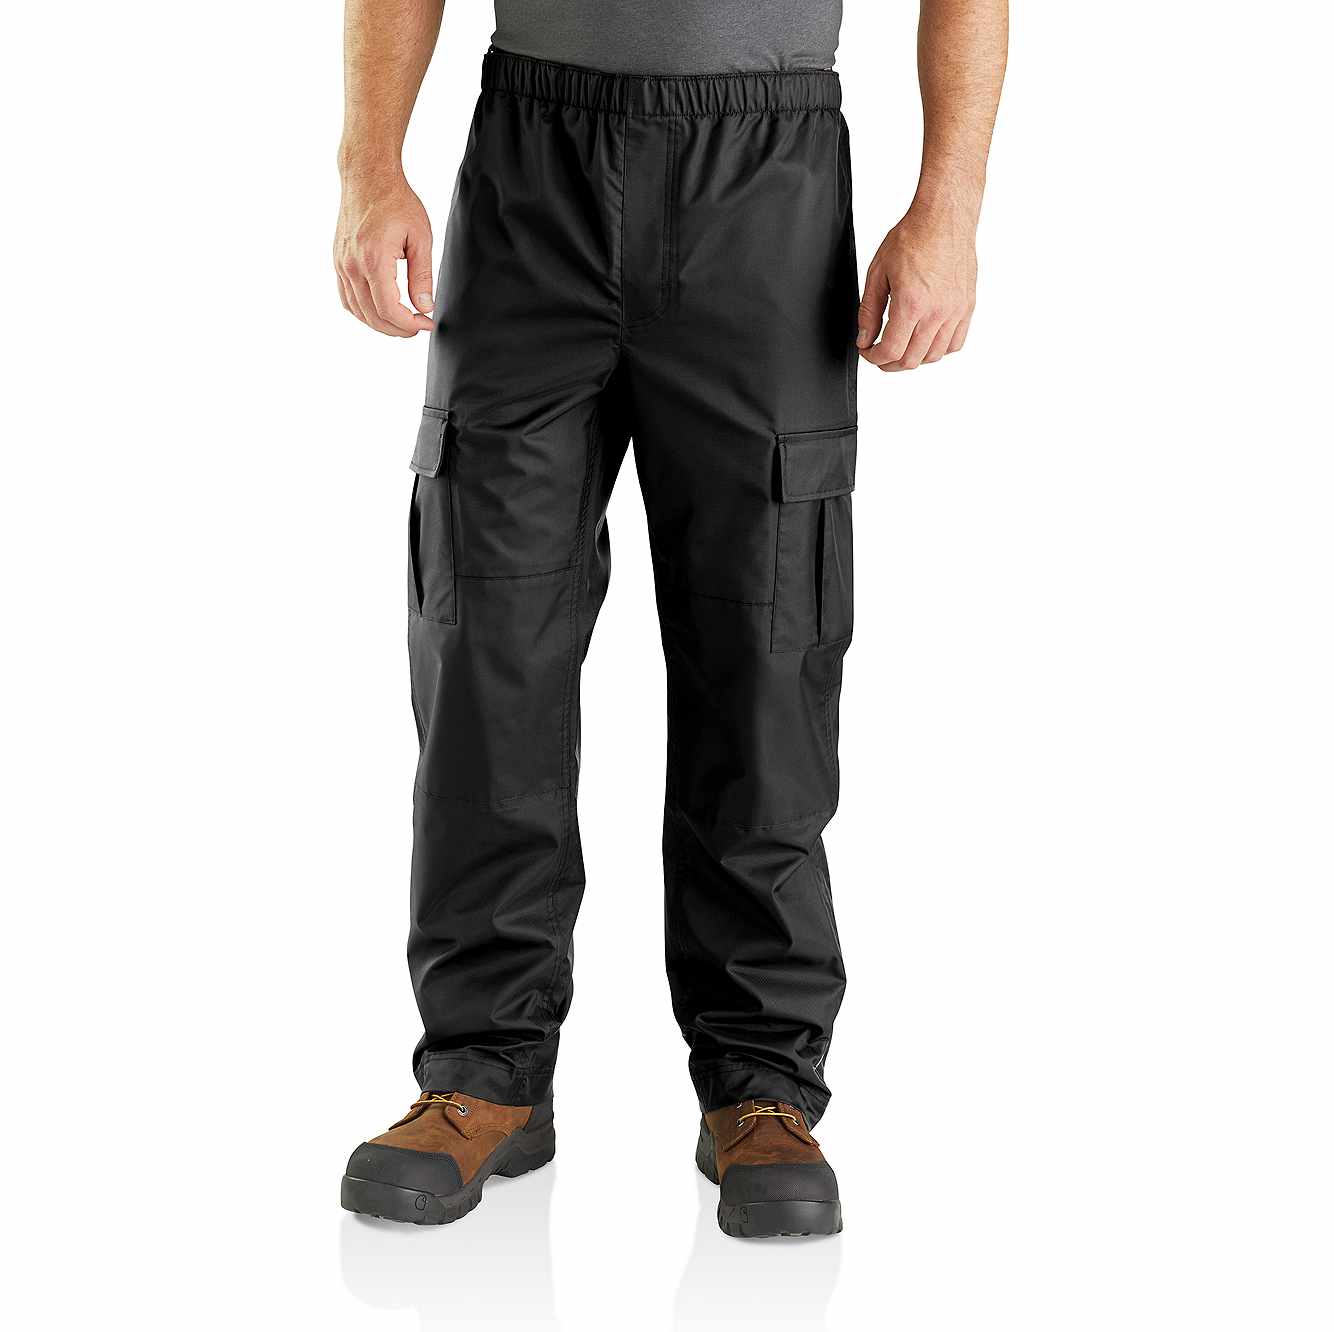 Storm DefenderÂ® Relaxed Fit Midweight Pant